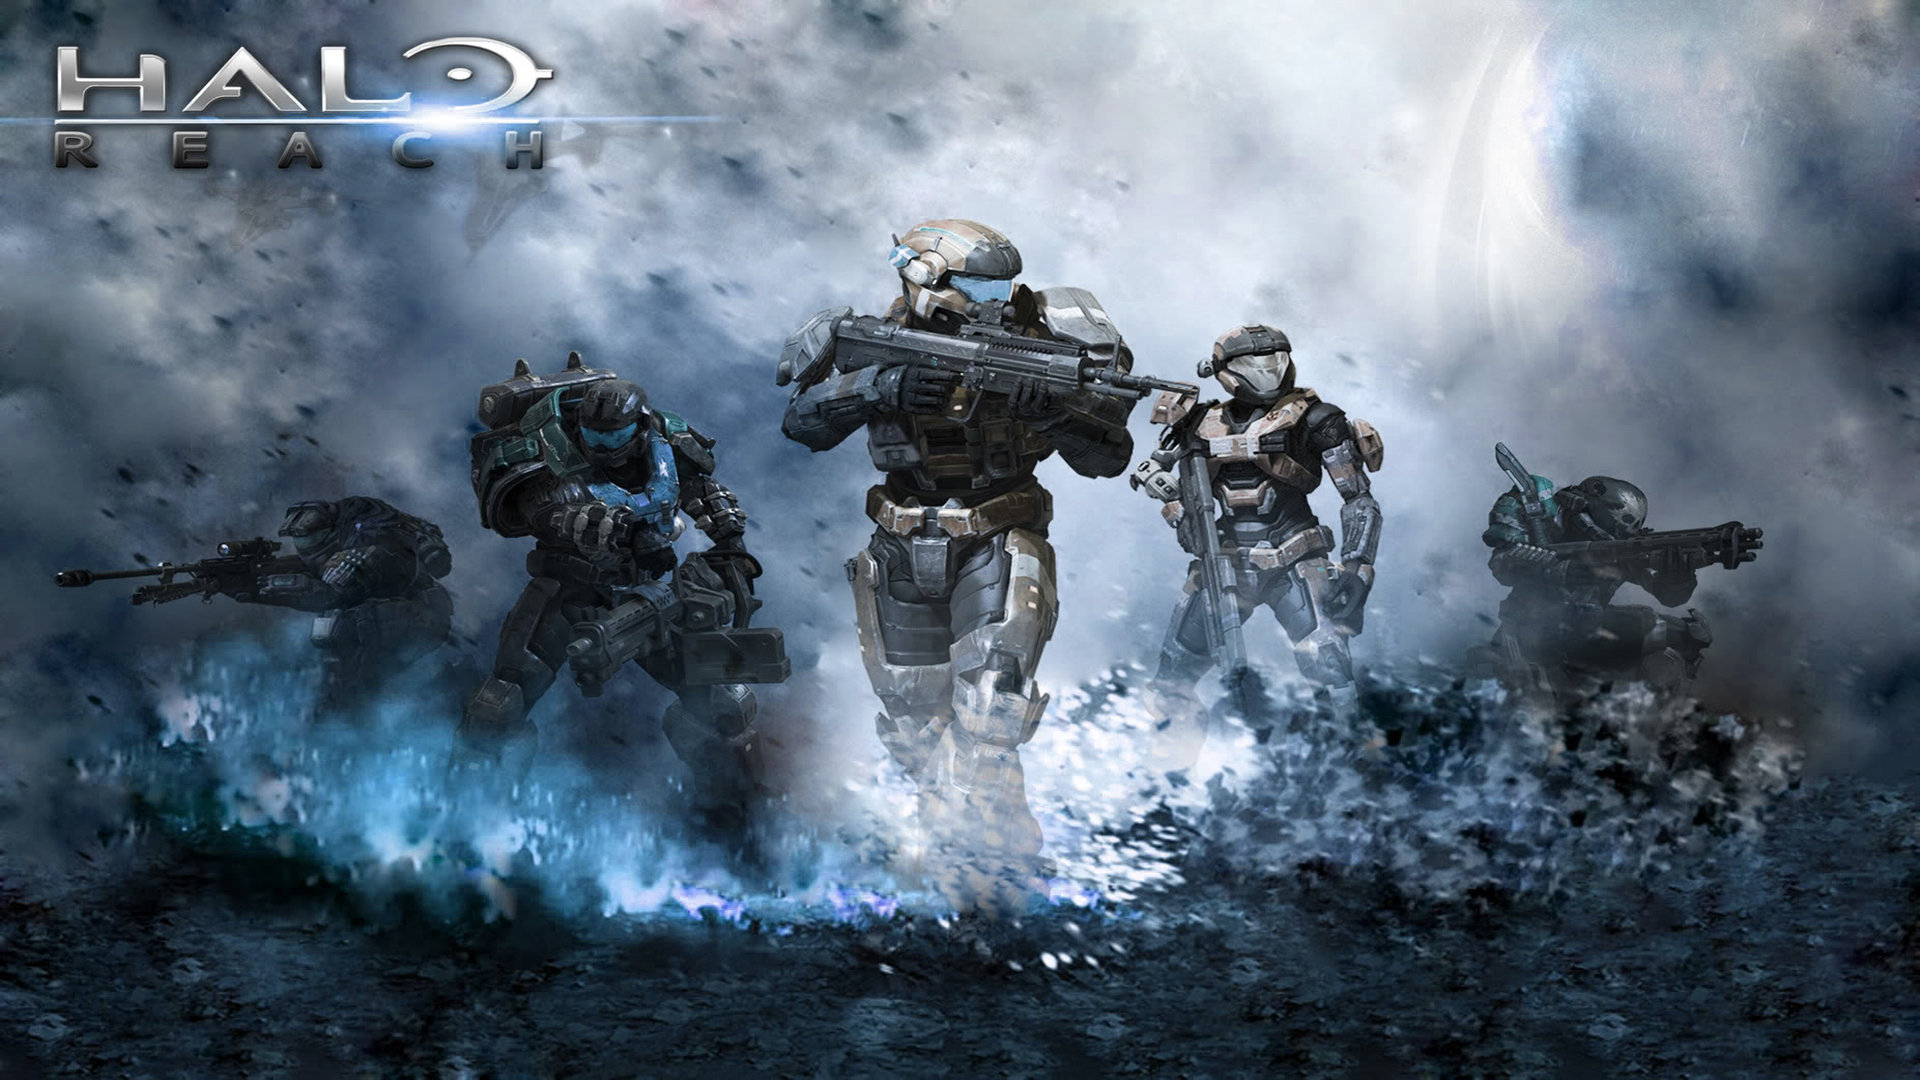 Halo Reach Hd Wallpapers Group 79